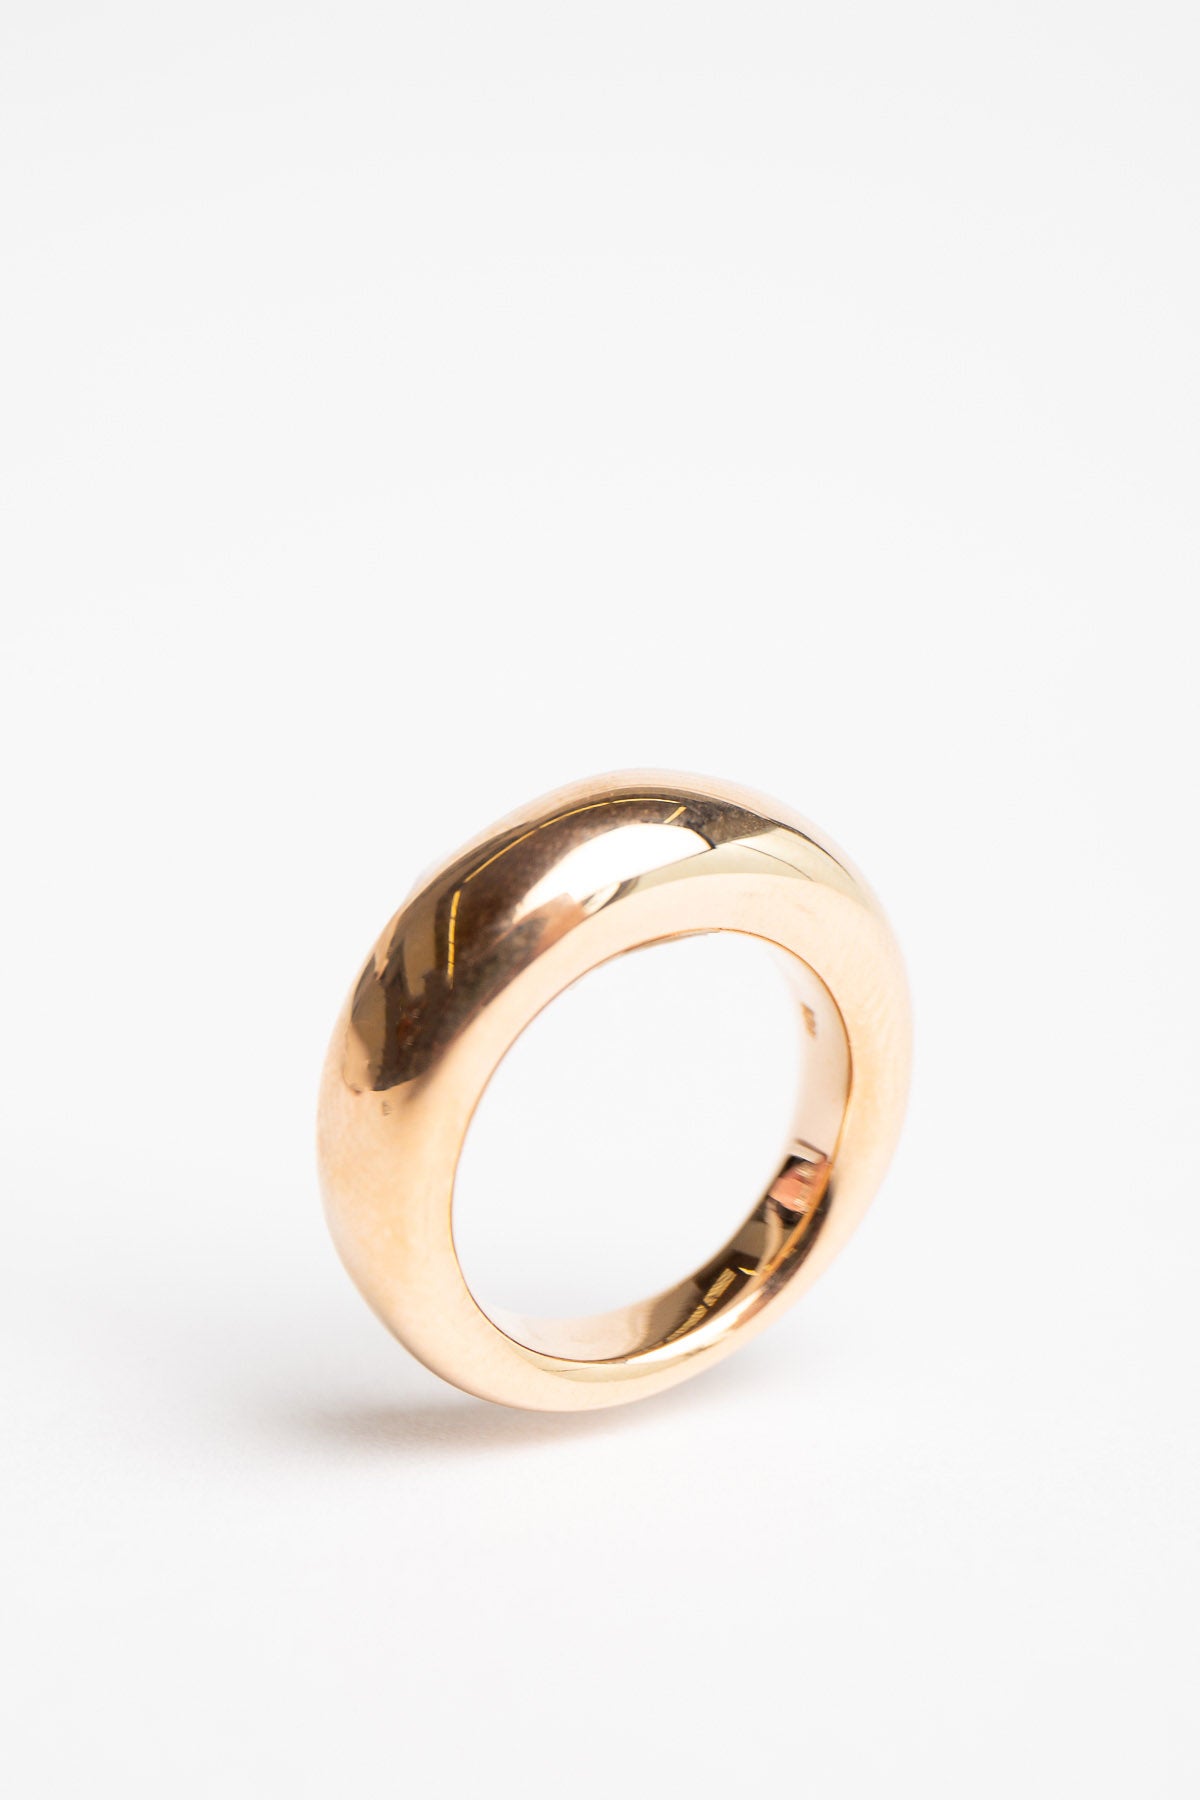 MAUD JEWELRY | 18K ROSE GOLD LOW DOME RING